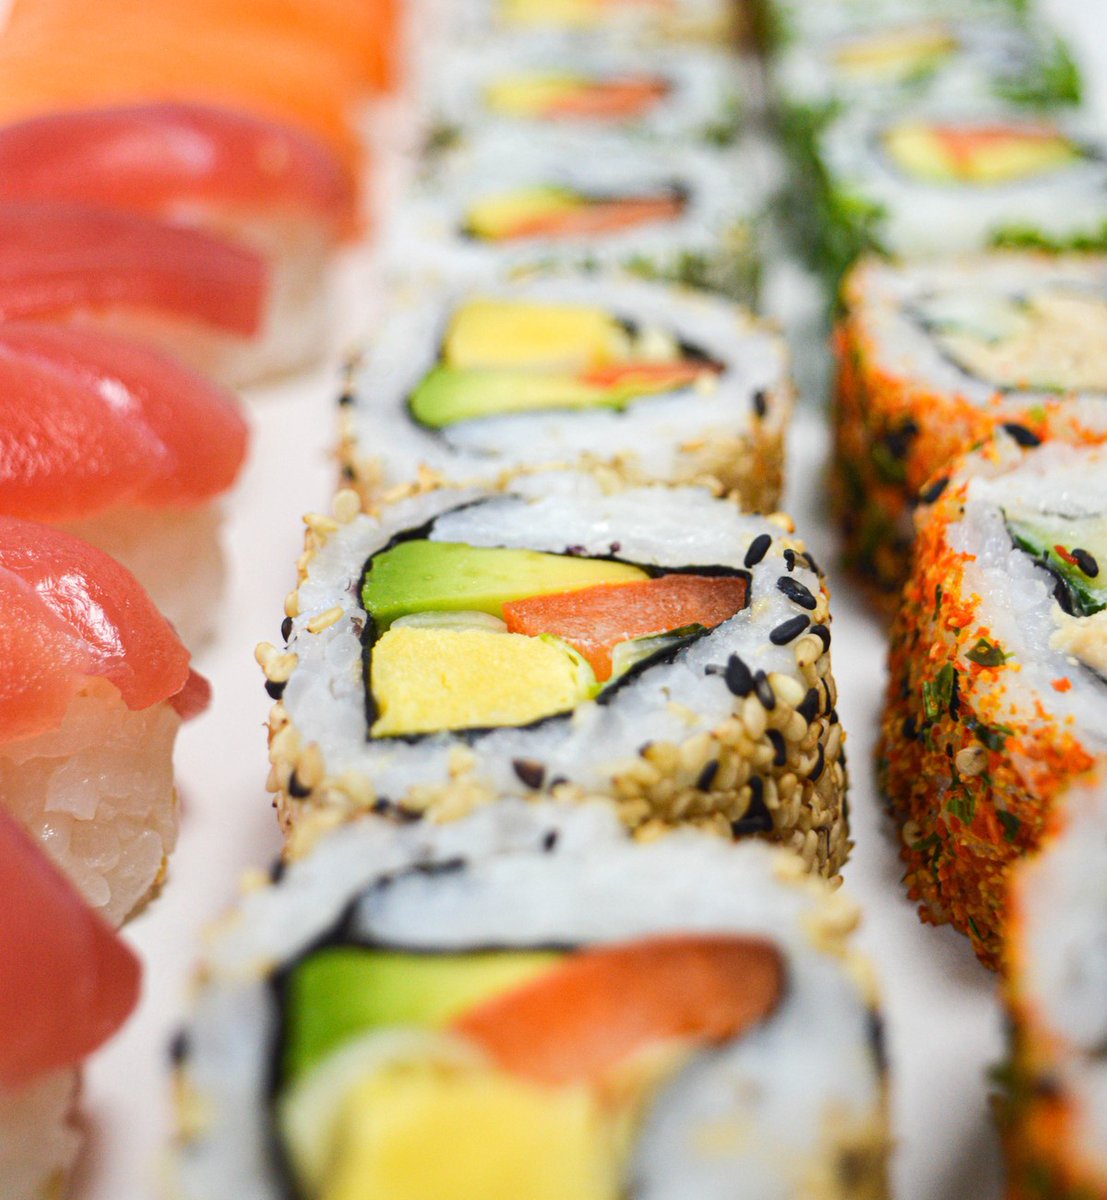 Get you hands on our delicious sushi, available from all coffee shops across campus! 🍣🤩

#MyCityUni #CityUniversityofLondon #LondonUniversity